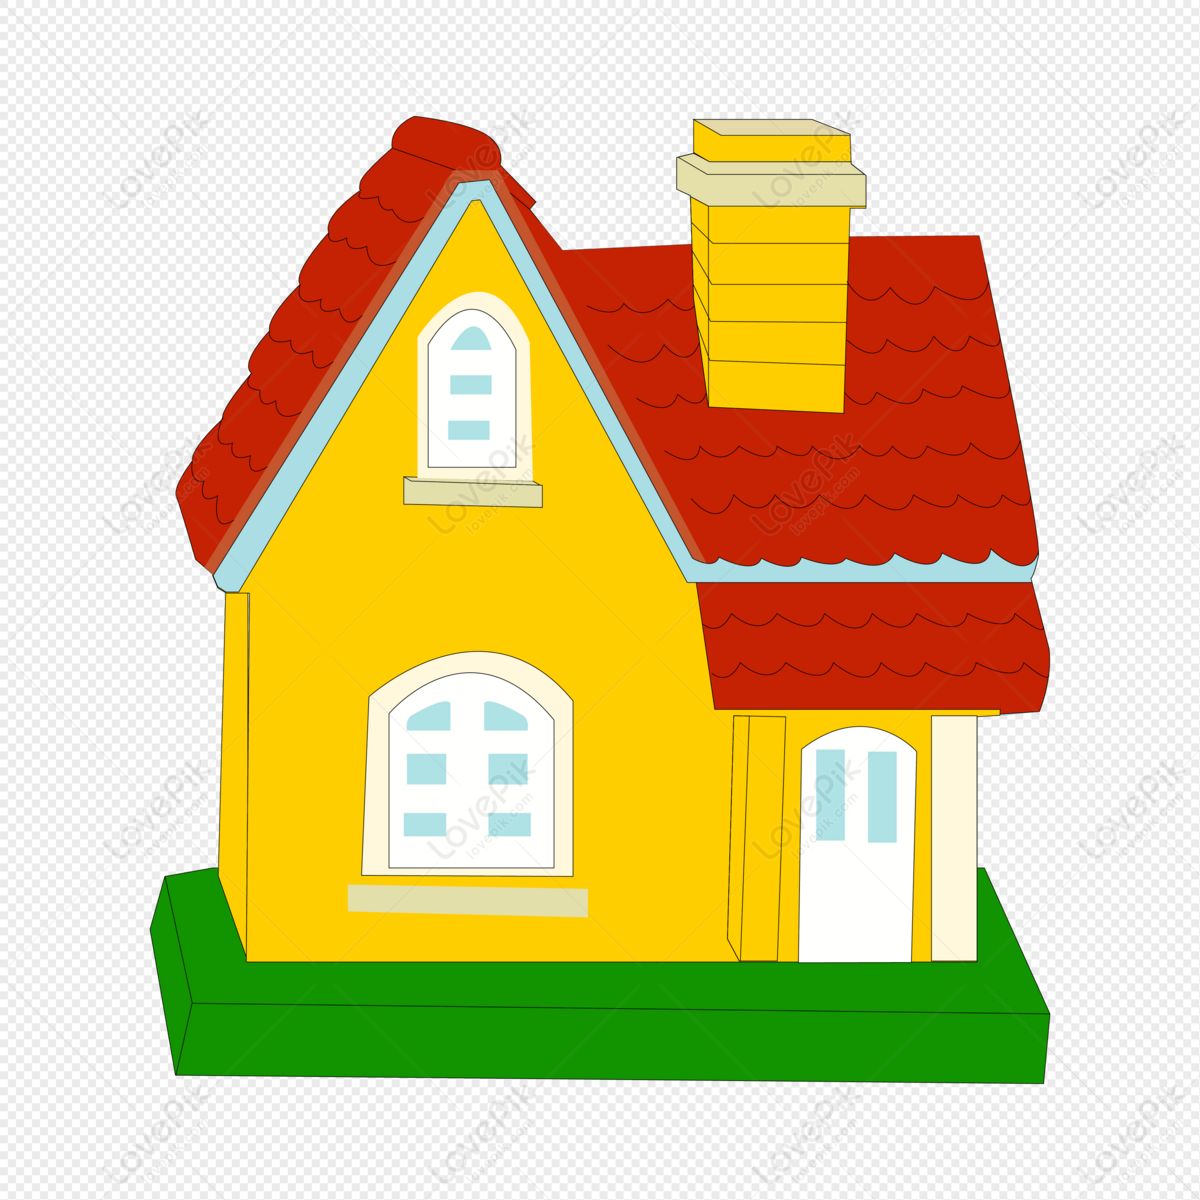 Cartoon Hand Drawn Colorful House PNG Transparent Image And Clipart Image  For Free Download - Lovepik | 401408187